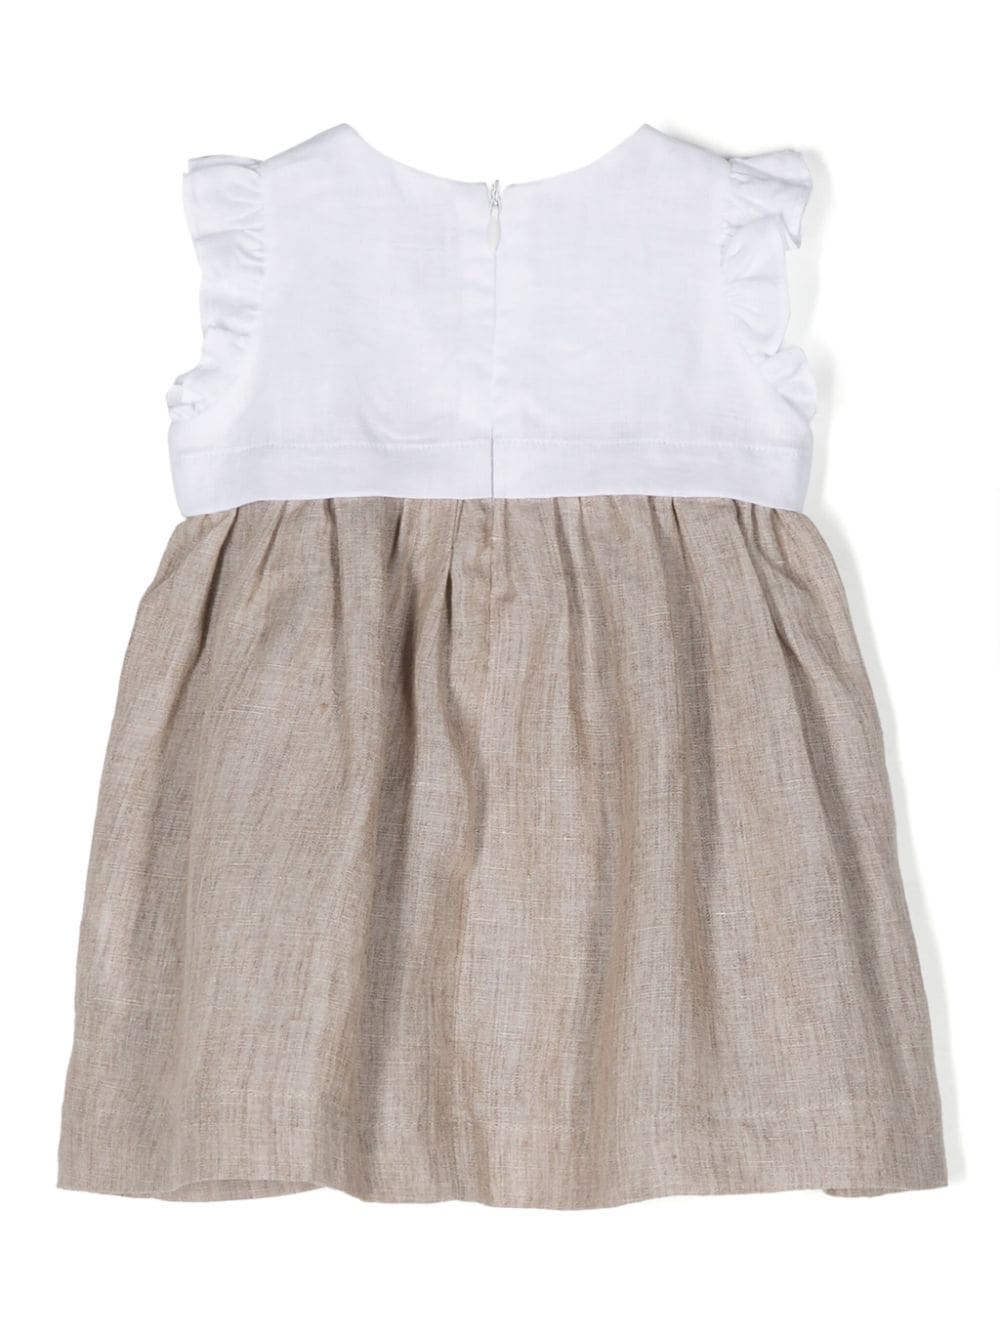 White and beige dress for baby girls